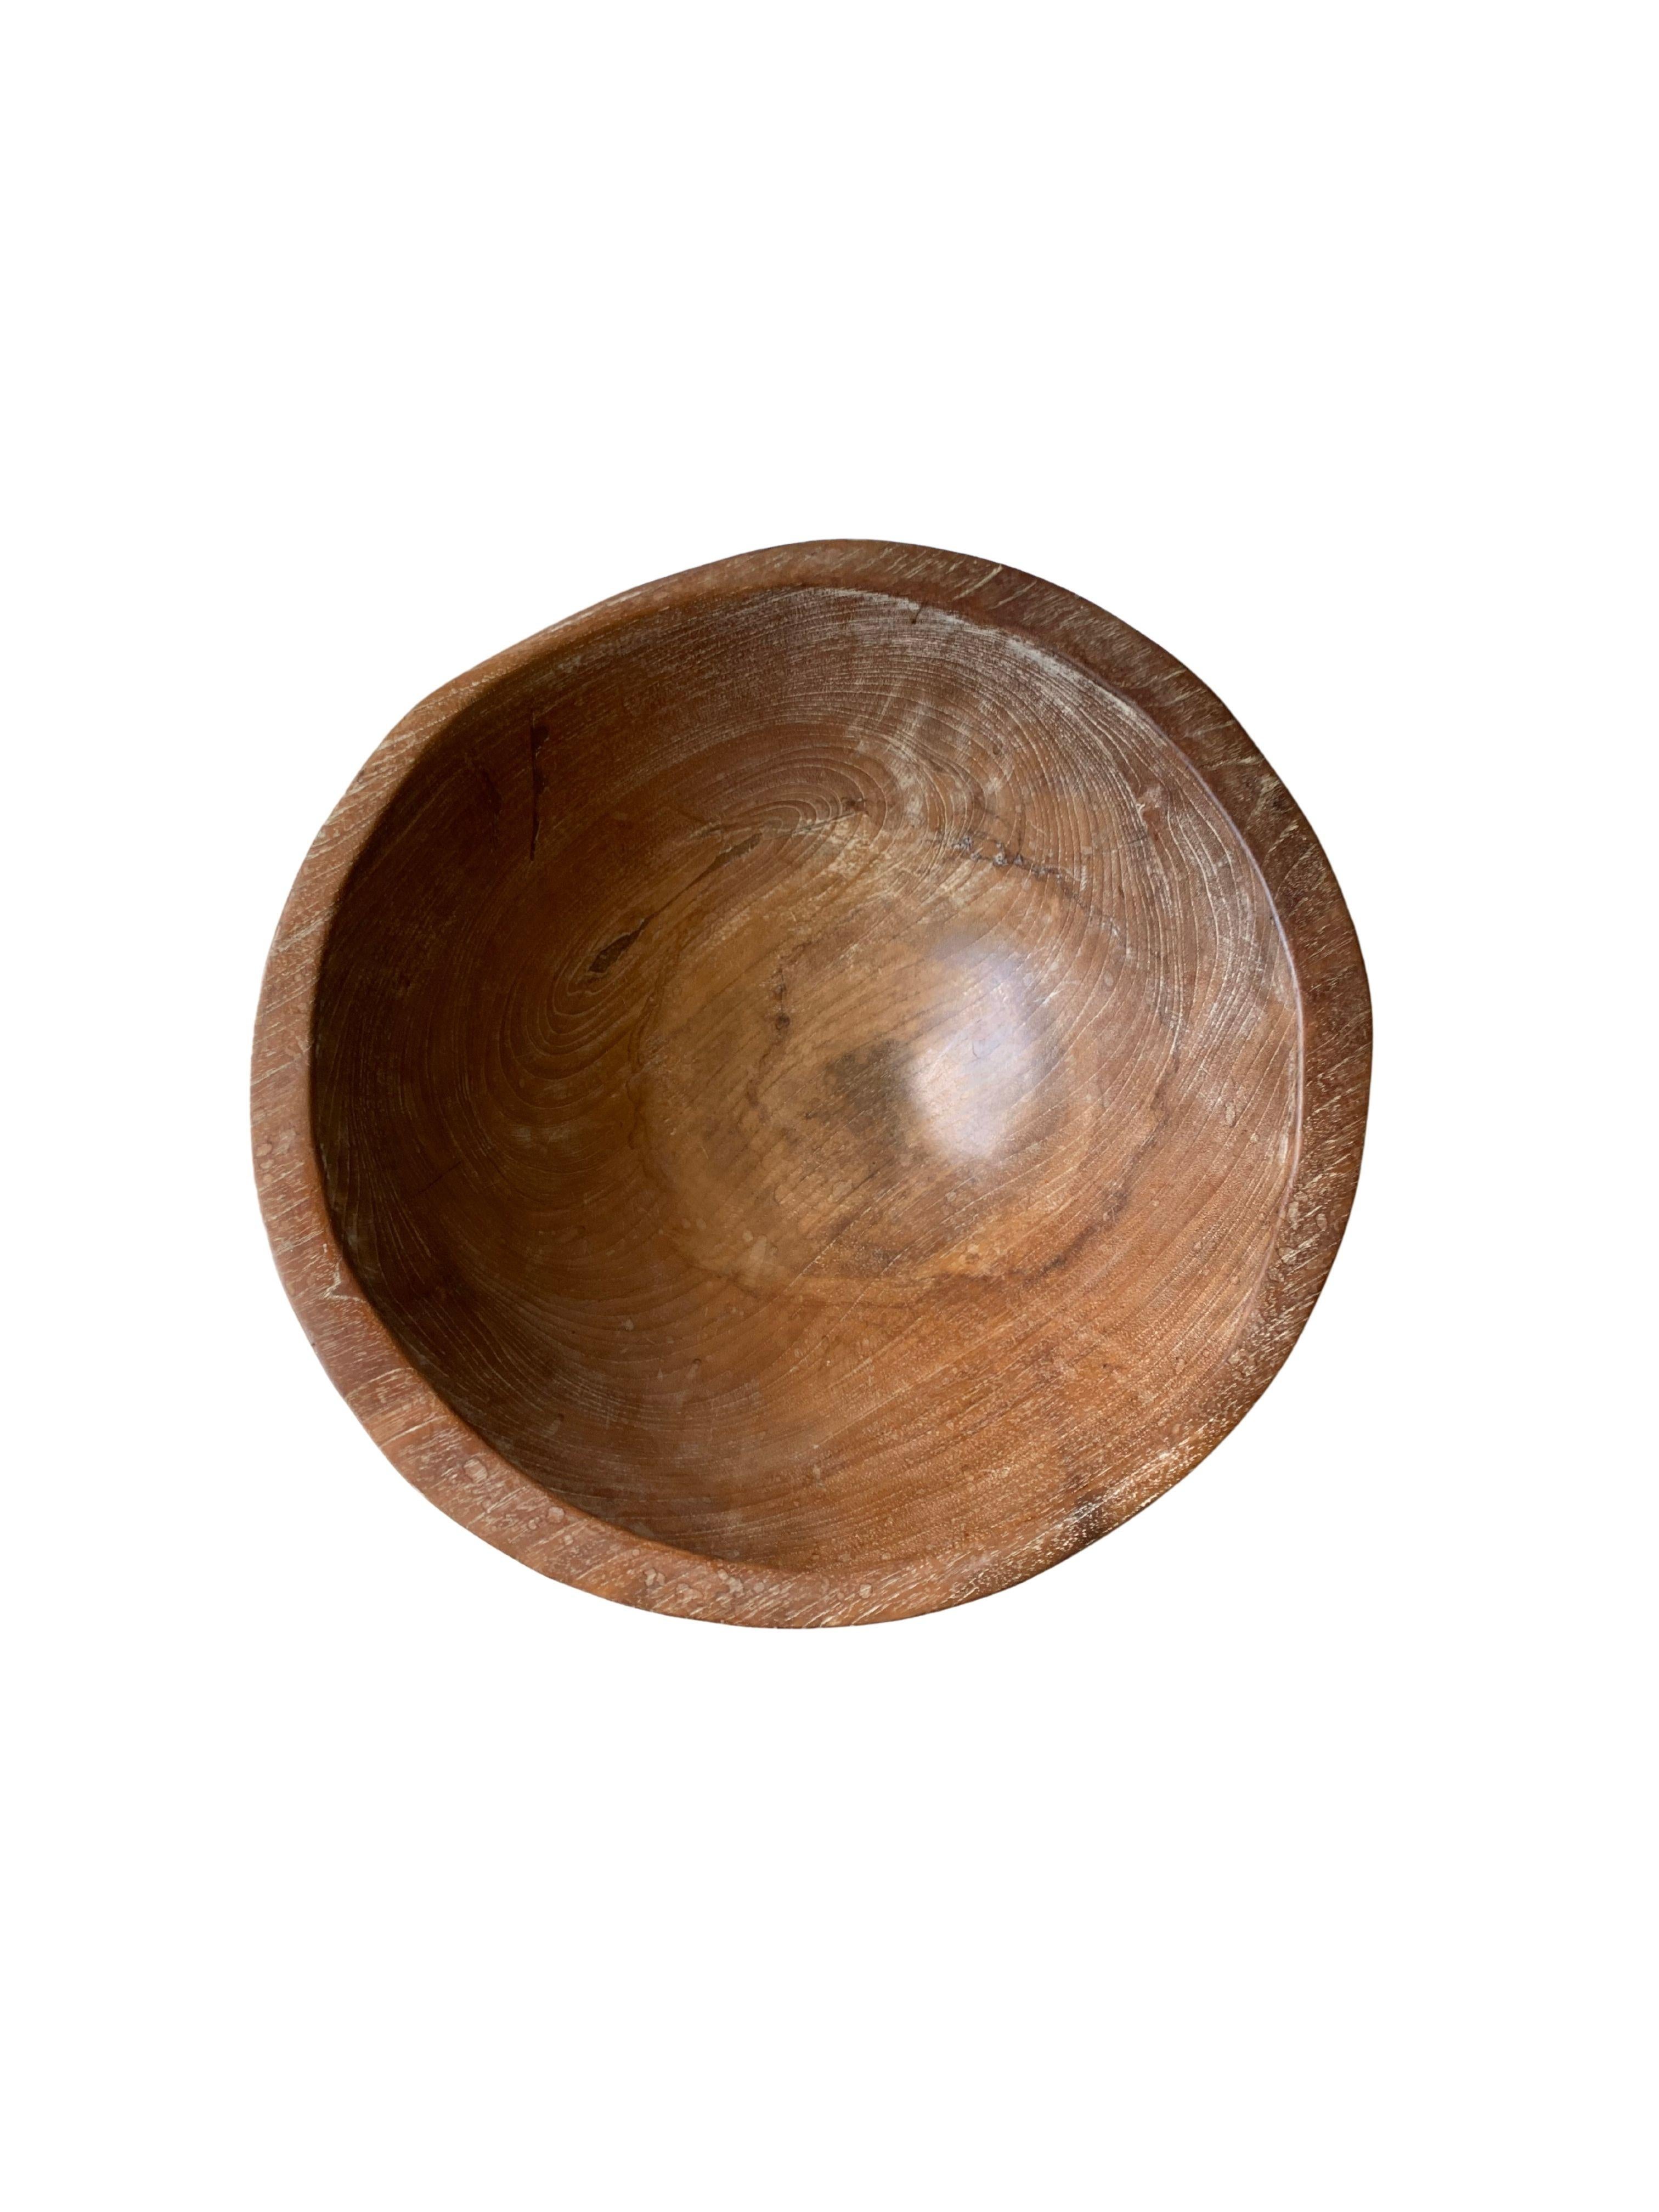 Carved Solid Teak Burl Wood Bowl from Java, Indonesia For Sale